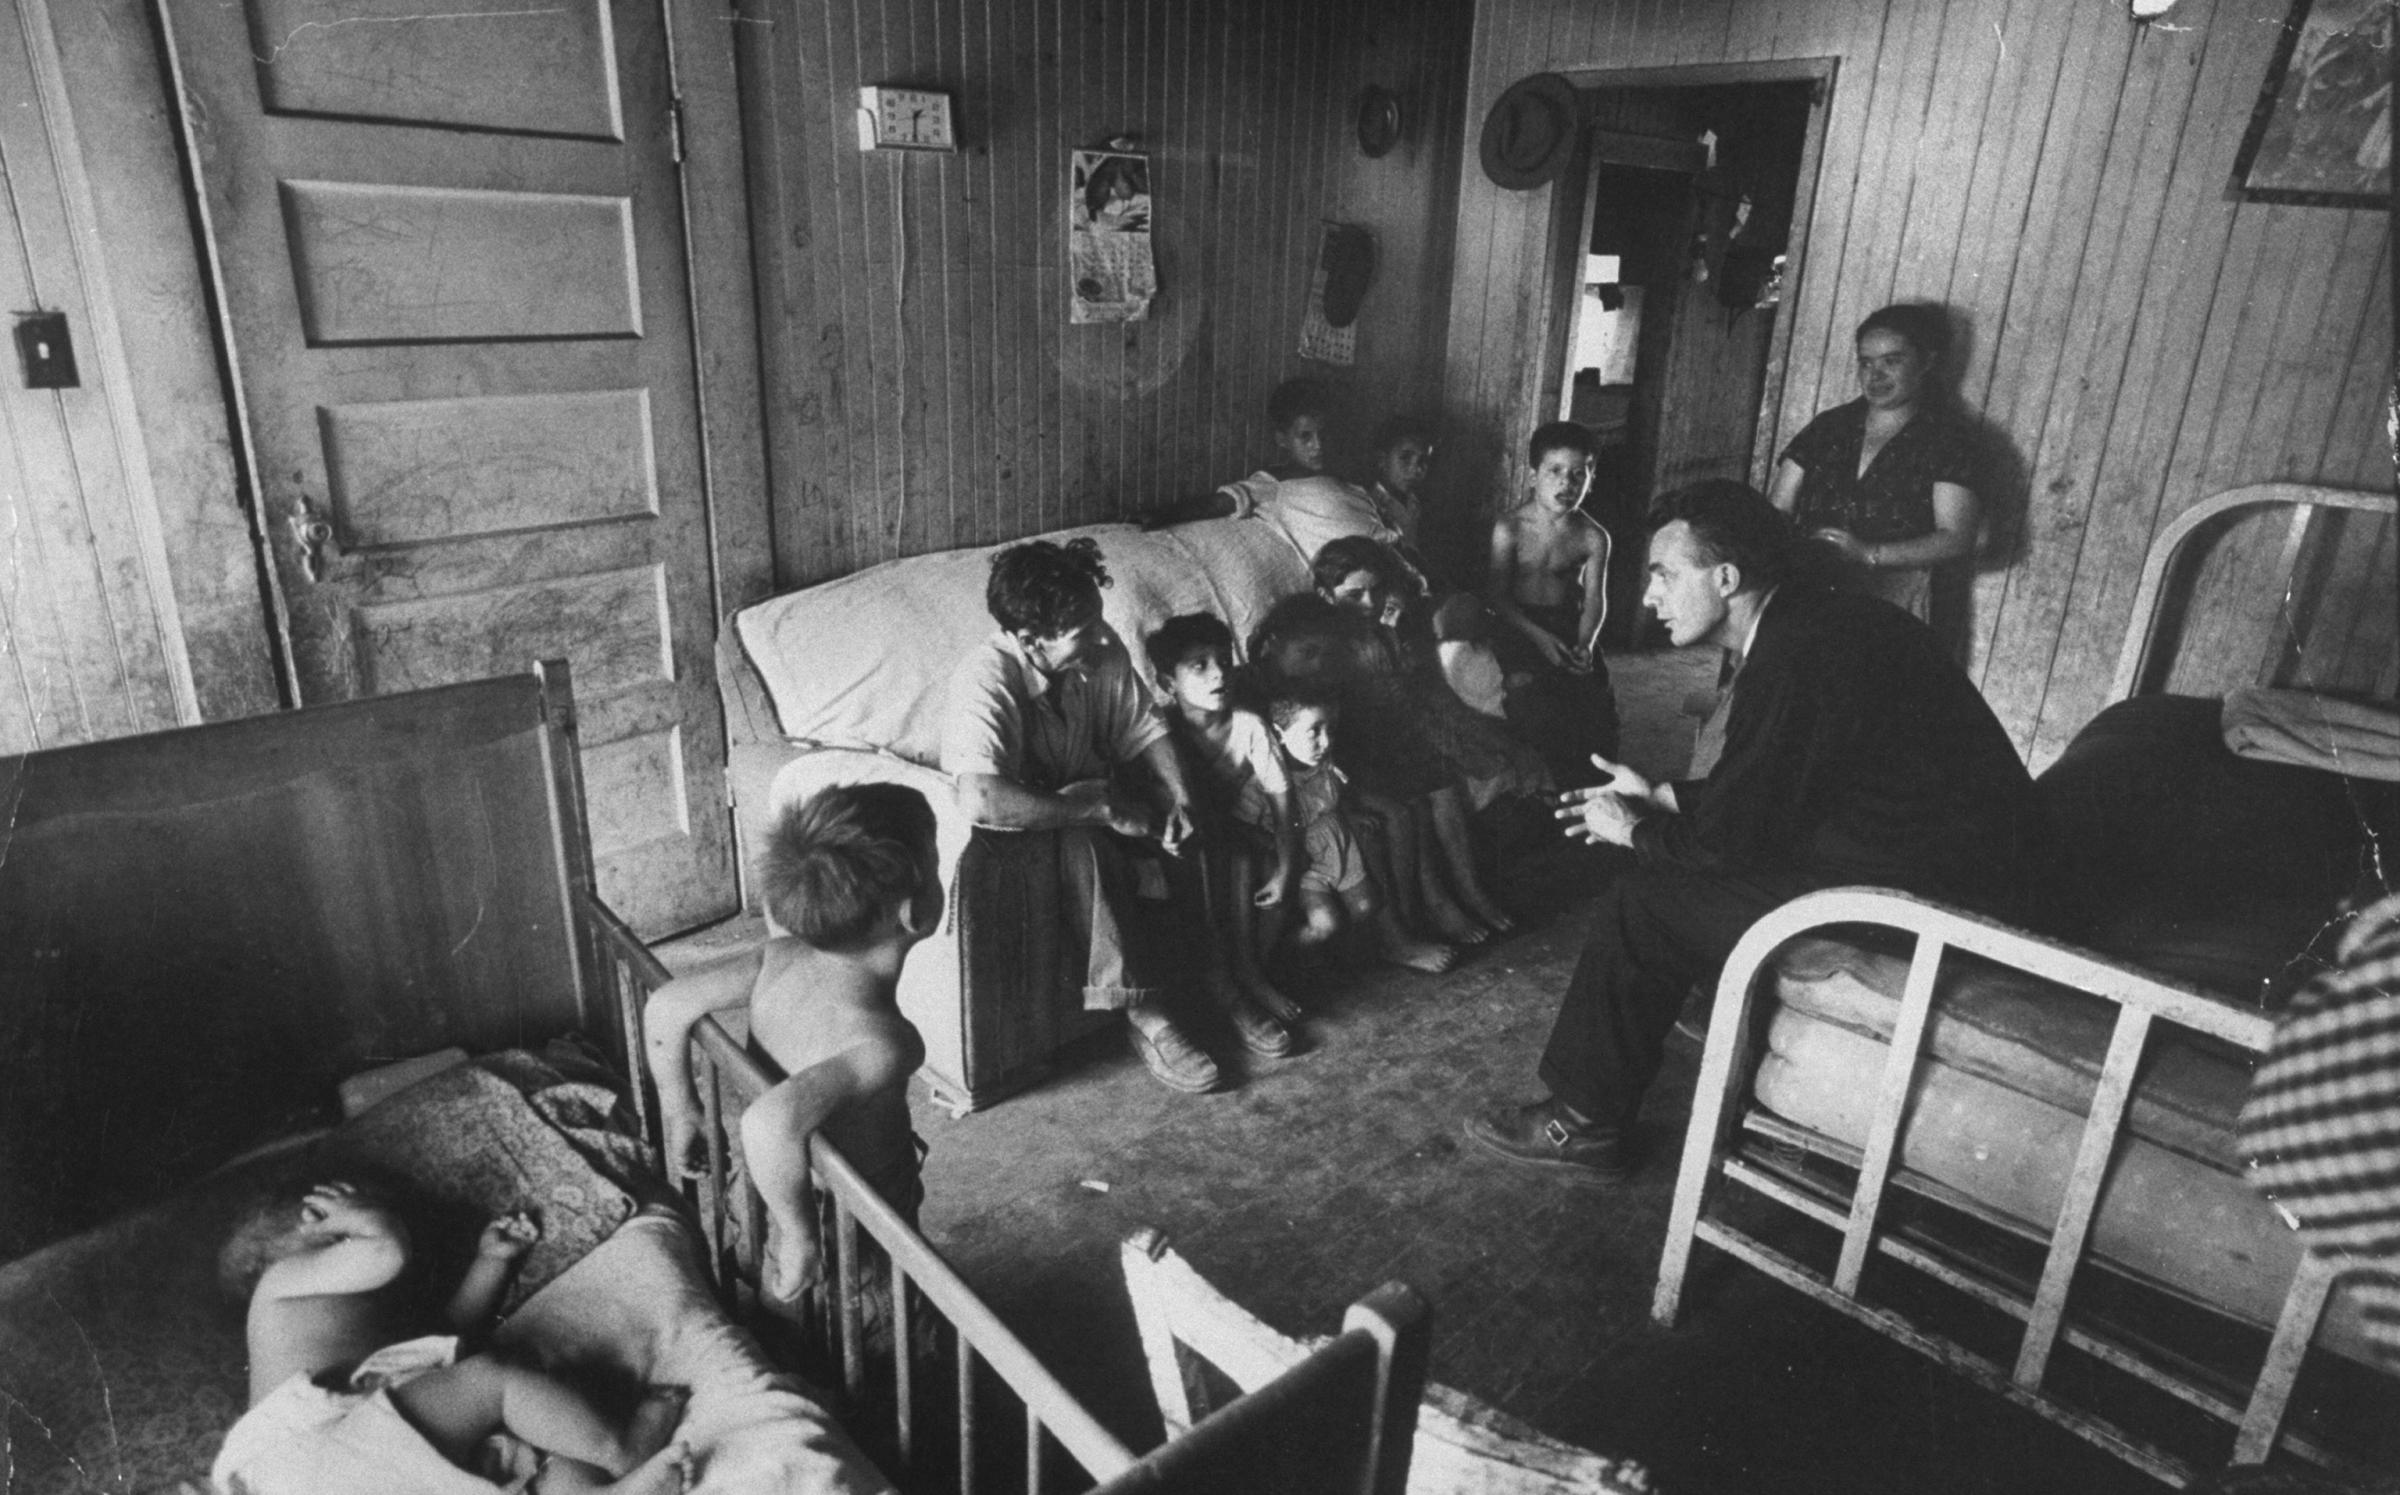 A priest and workers' rights activist speaks with a migrant worker's family in Stockton, California, 1959.